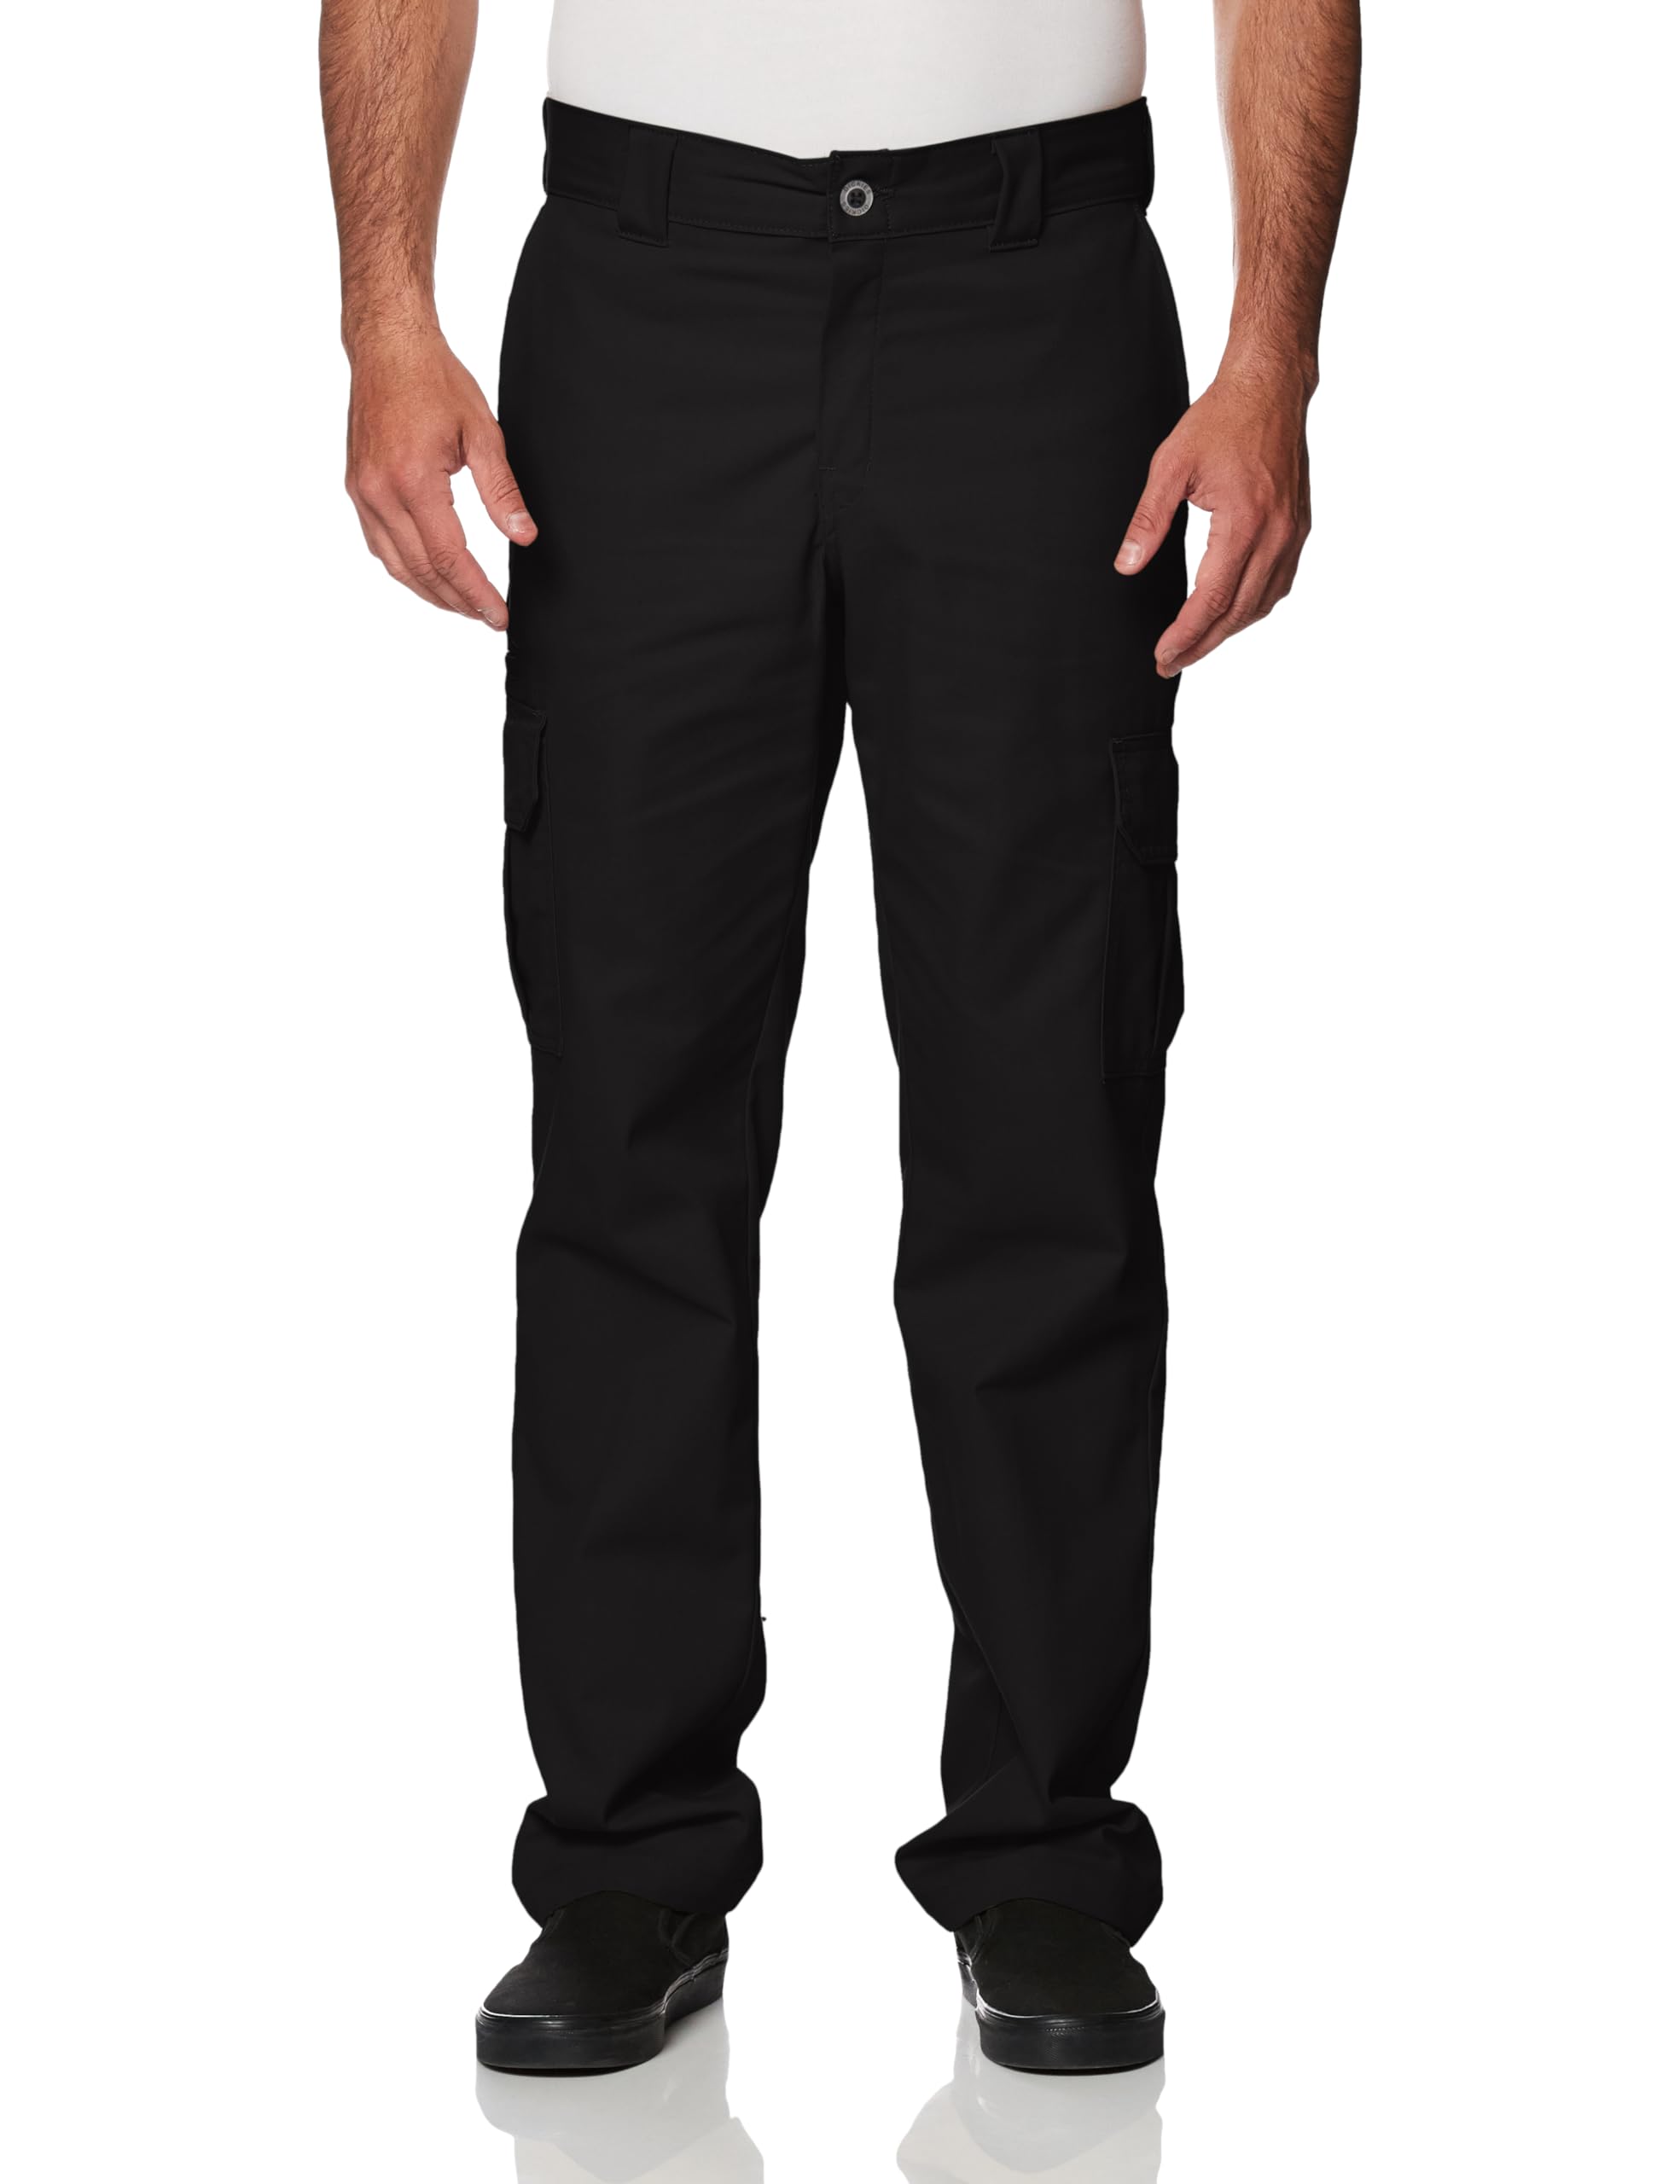 Dickies Men's Regular Straight Stretch Twill Cargo Pants (Black) $20 + Free Shipping w/ Prime or $35+